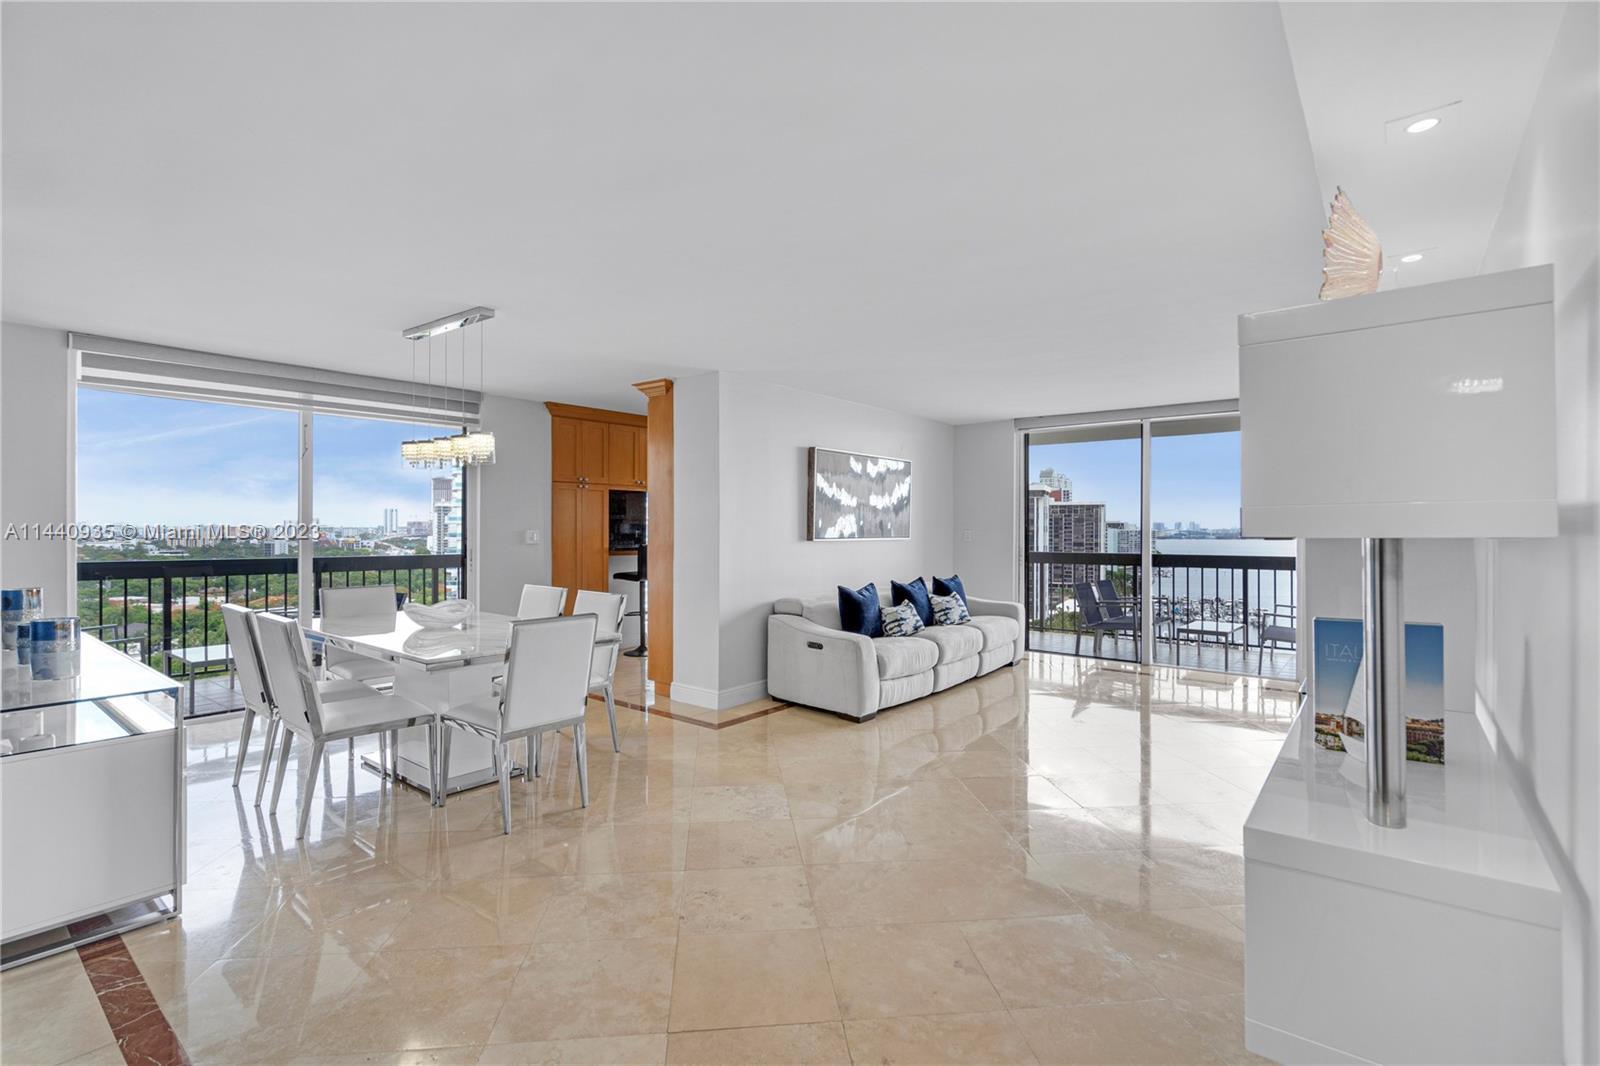 Located in Miami's Most Desired Waterfront Cosmopolitan Neighborhood Of Brickell Is This Beautiful F